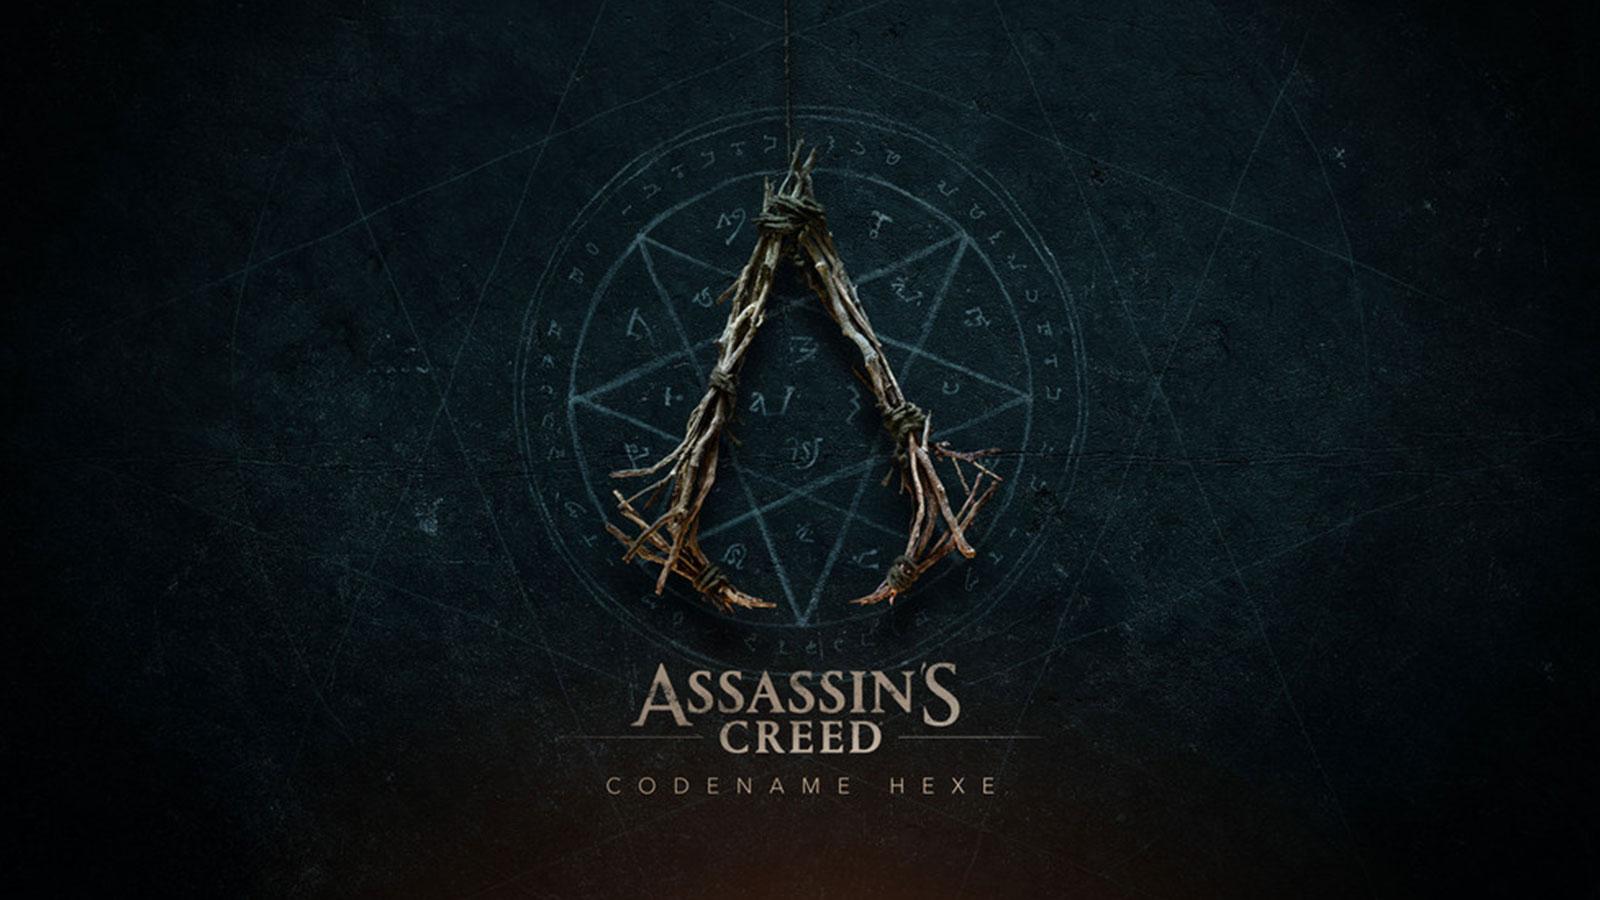 Assassin's Creed Hexe affiche